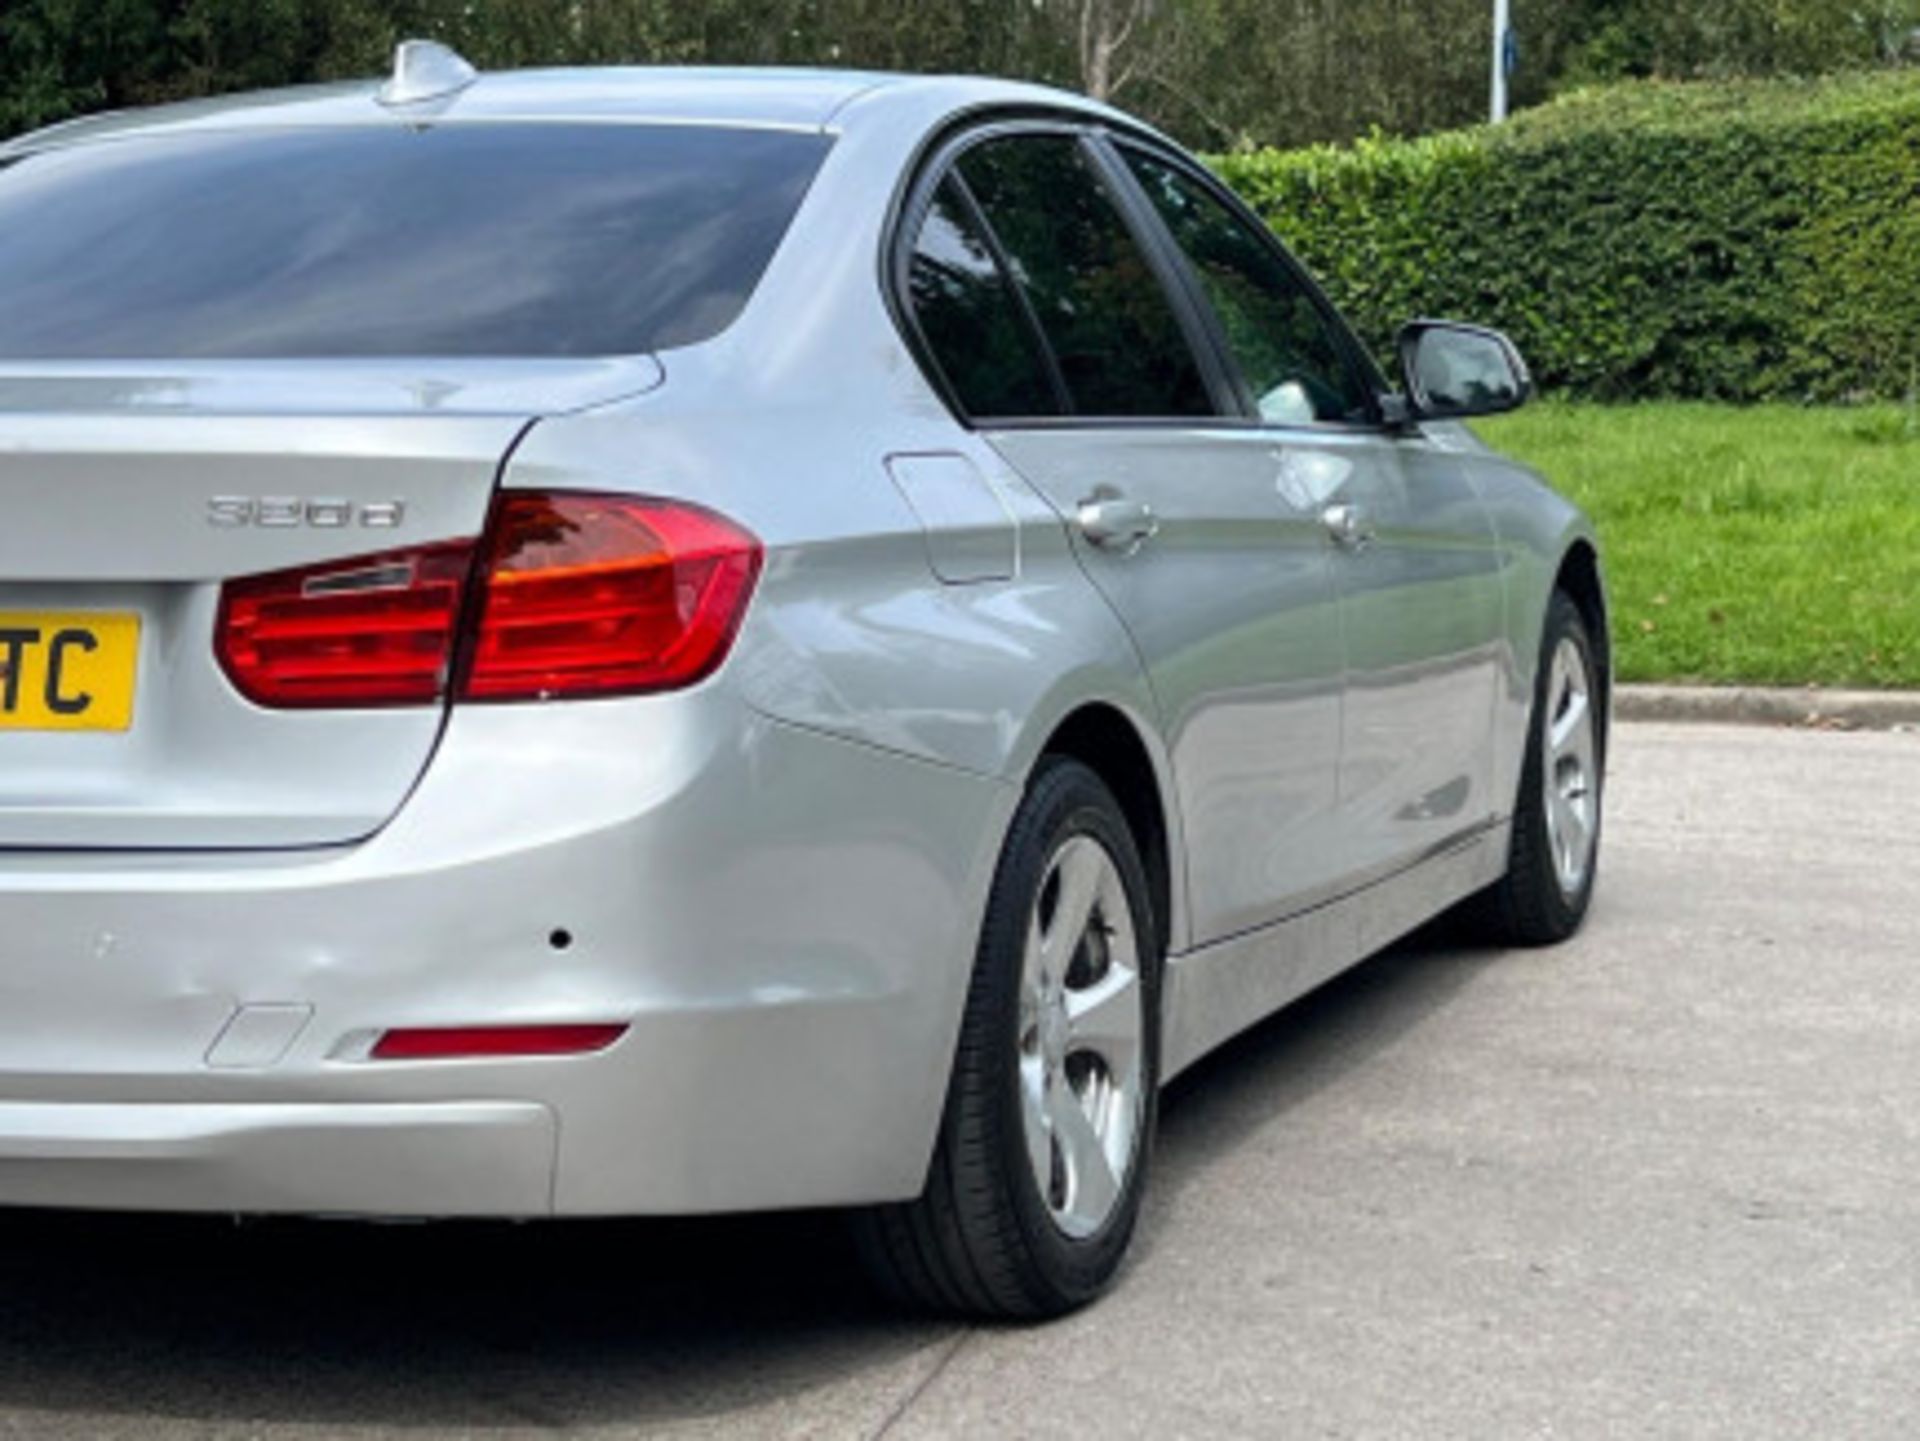 BMW 3 SERIES 2.0 DIESEL ED START STOP - A WELL-MAINTAINED GEM >>--NO VAT ON HAMMER--<< - Image 100 of 229